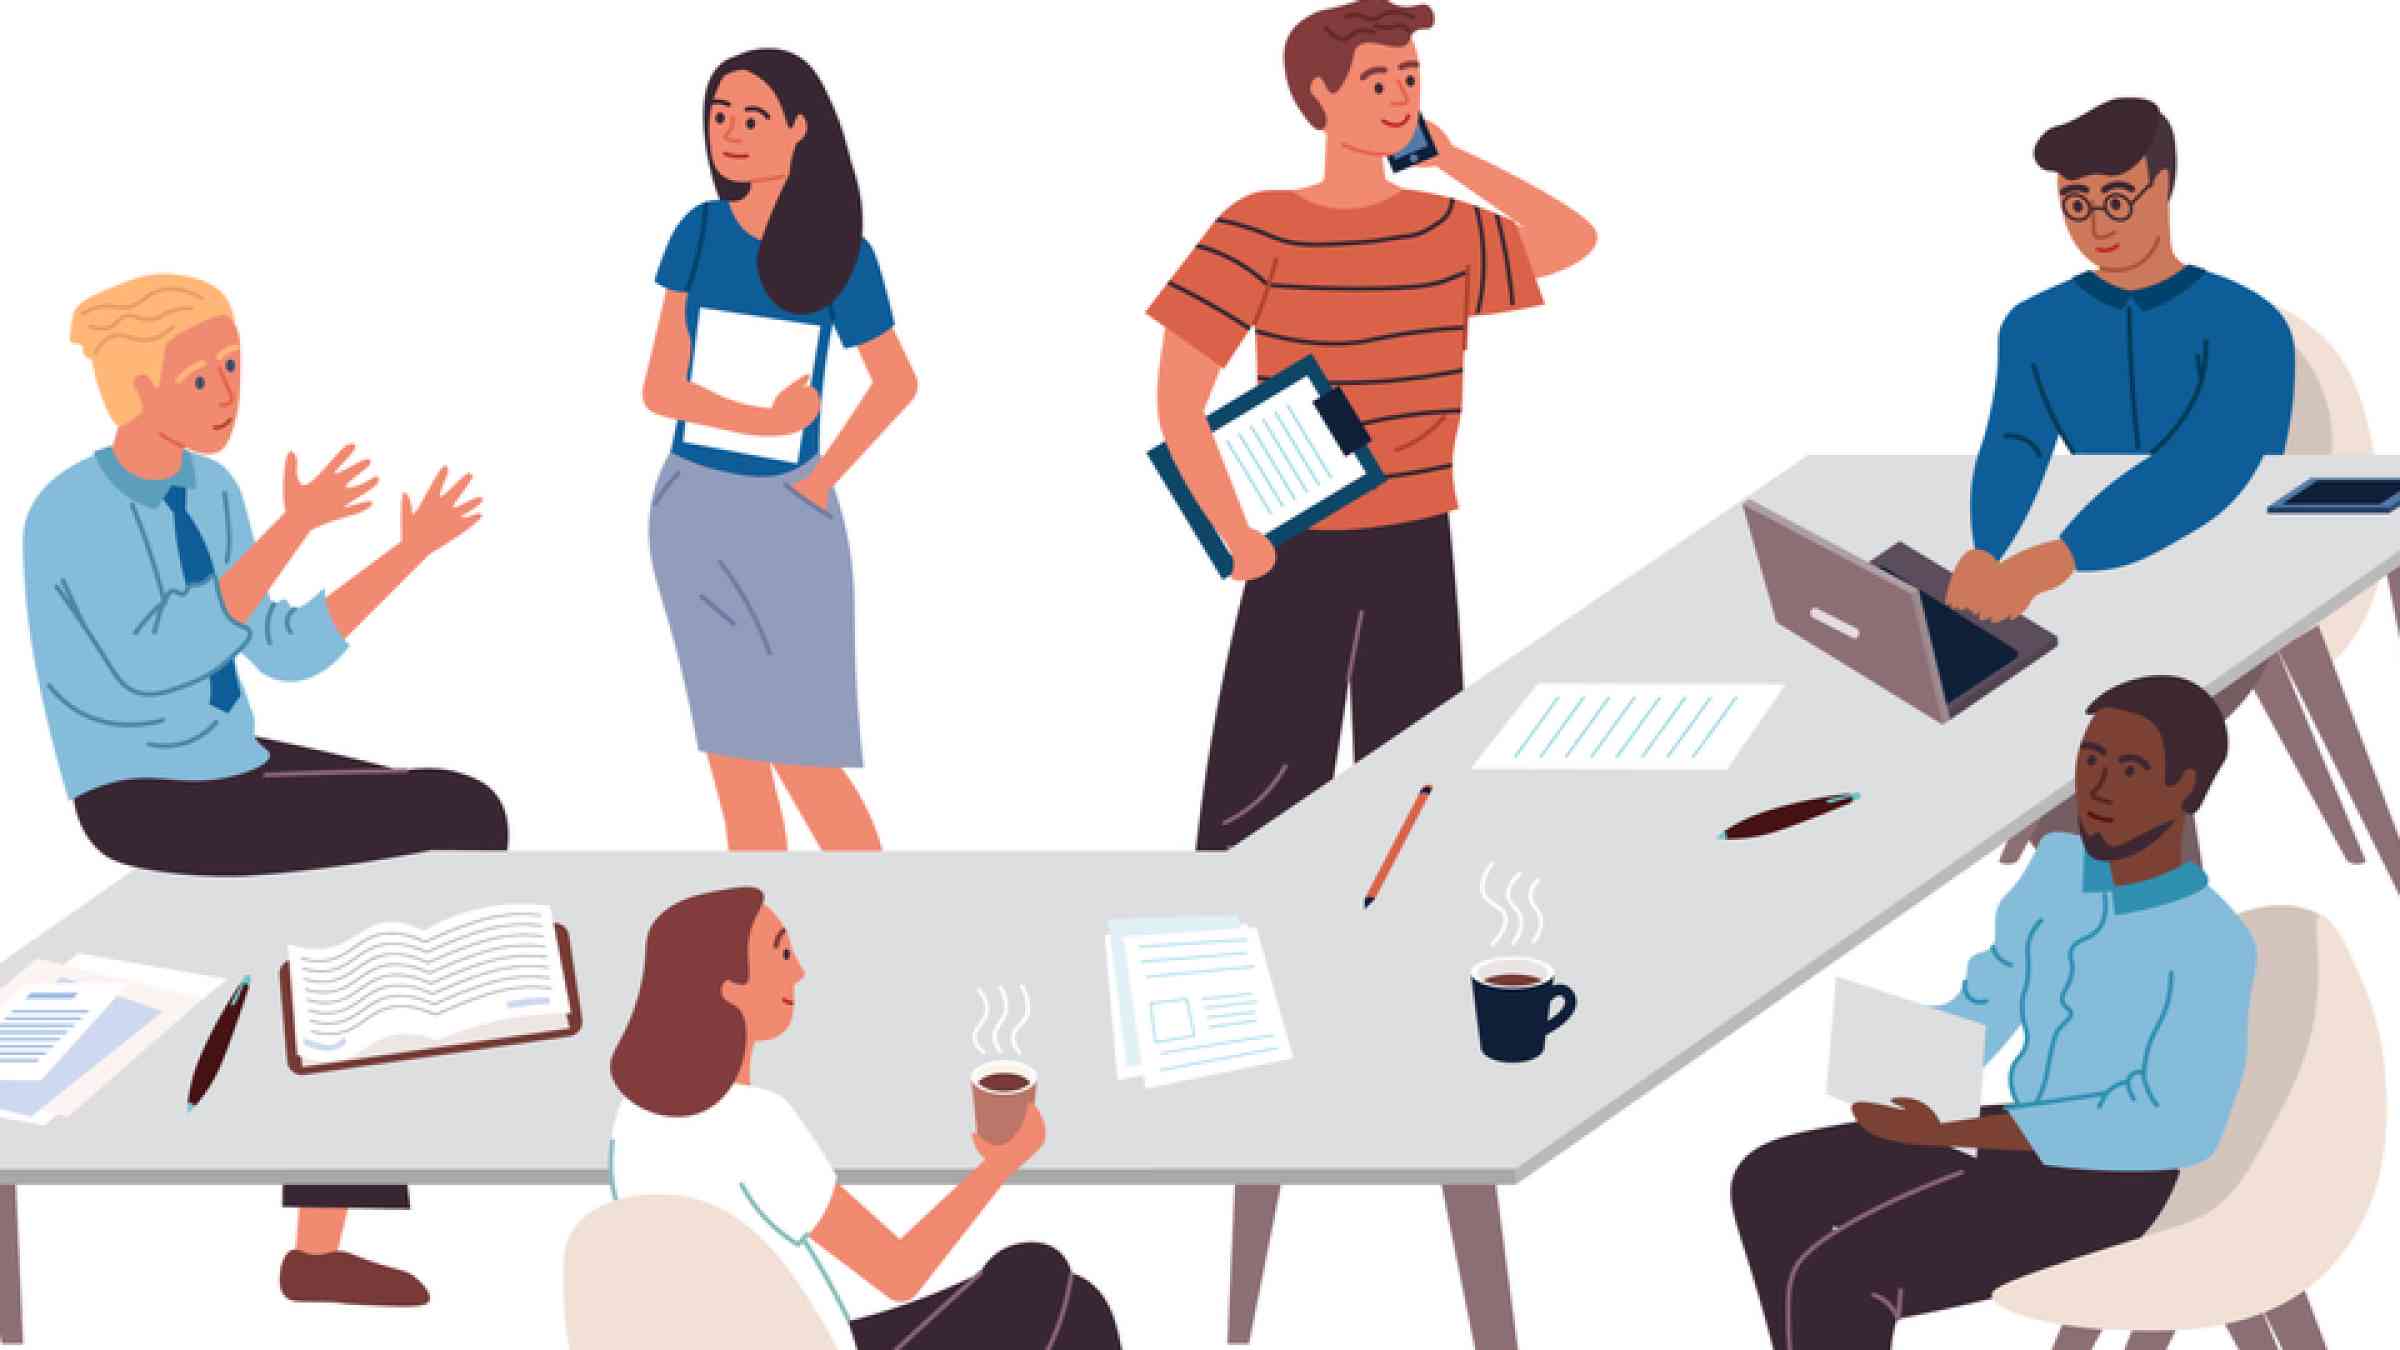 Illustration of people working collaboratively in an office